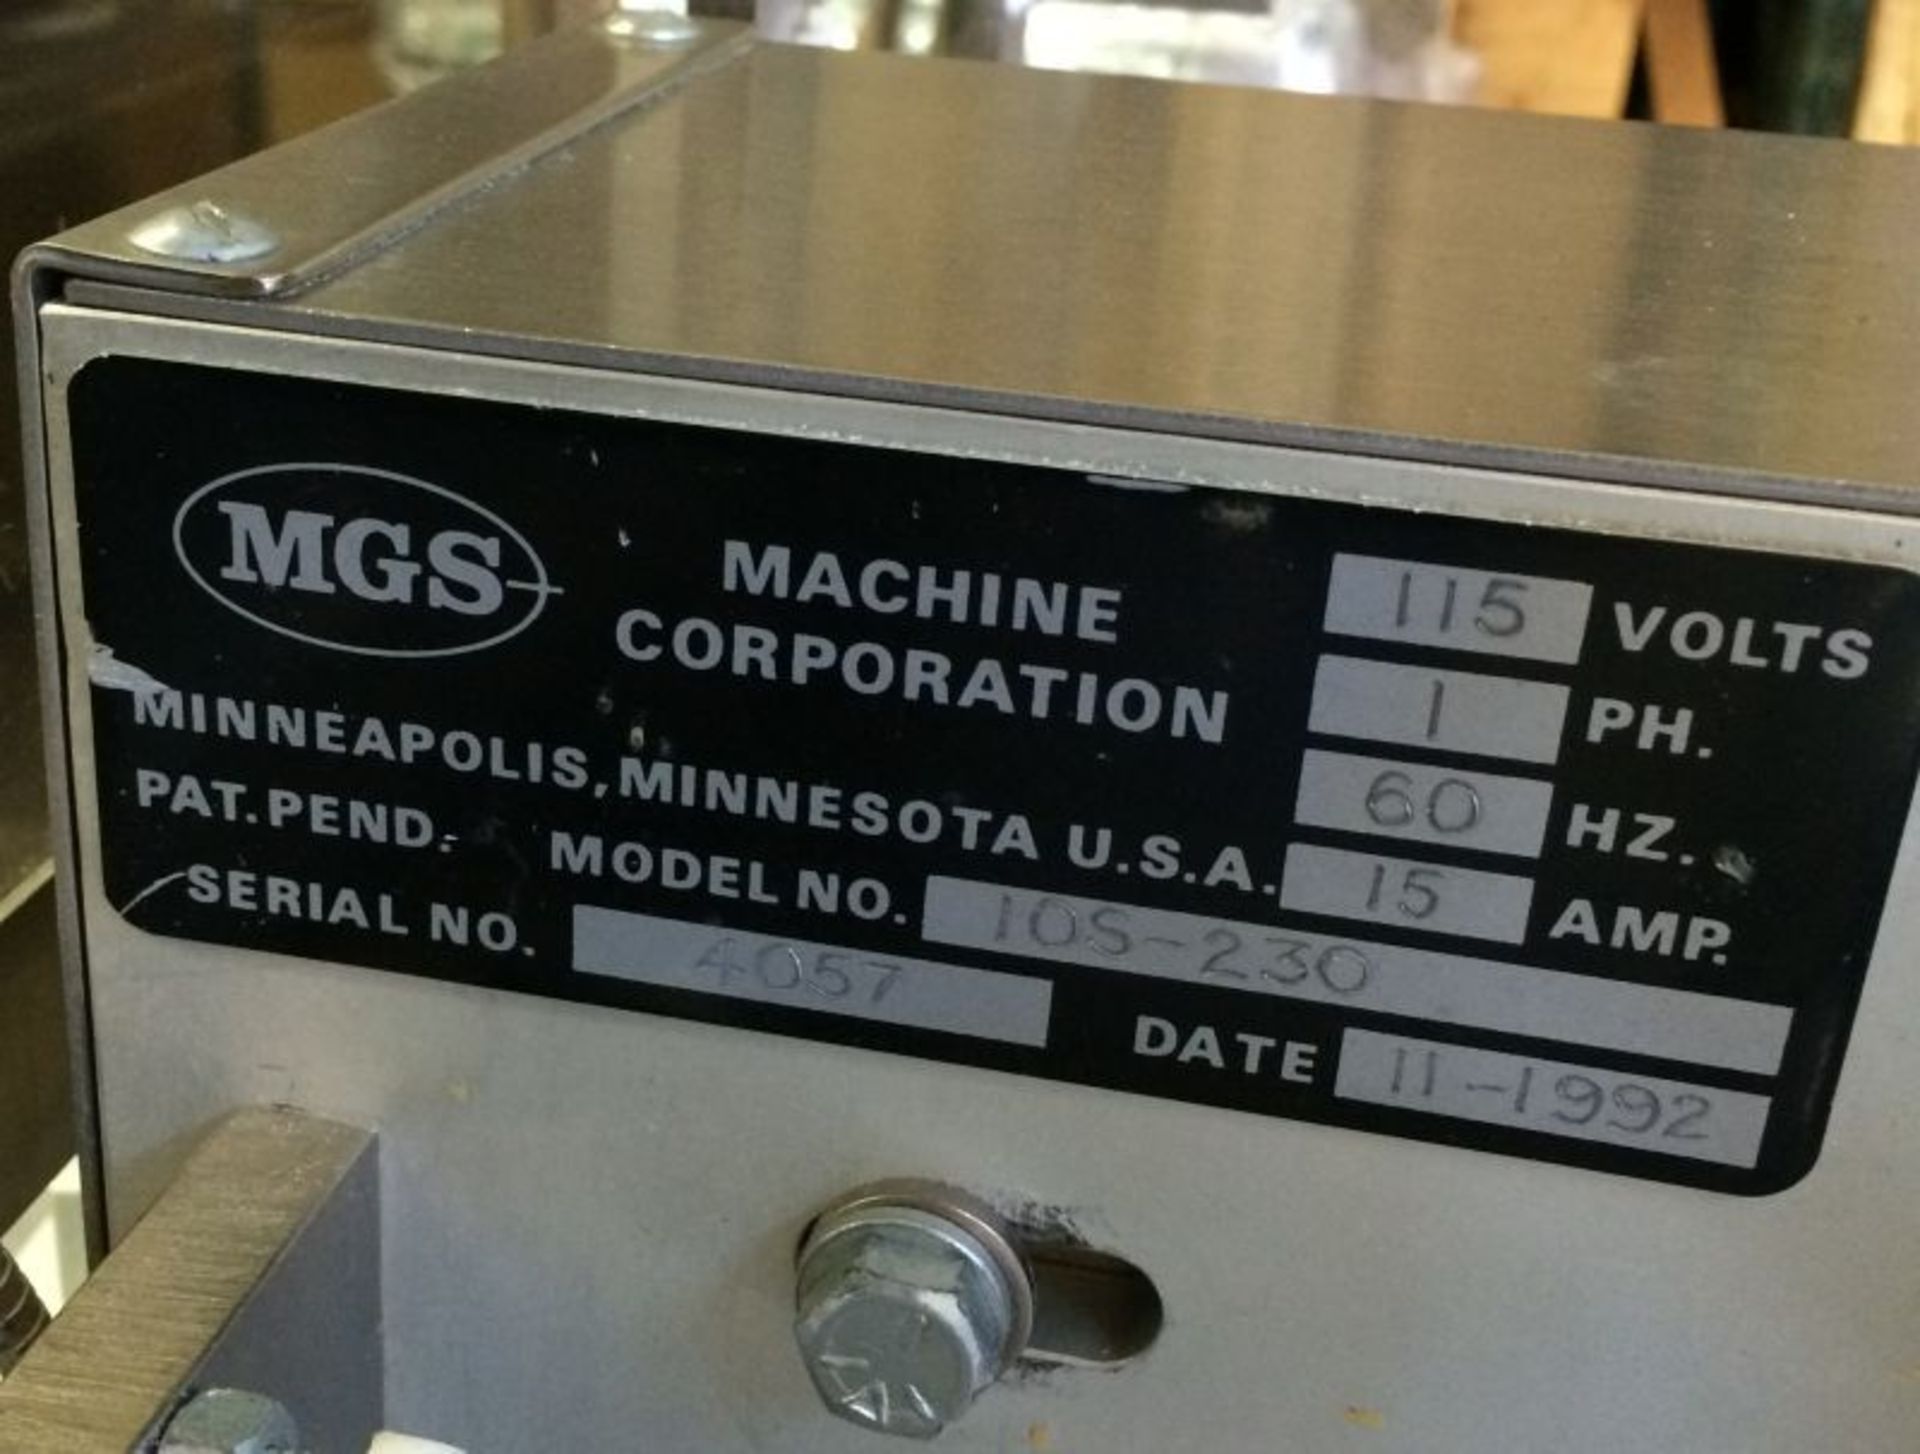 MGS Leaflet Inserter - Model 105-230, Serial 4057, 115 Volts, 1 Phase, 60 Hz, 15 Amp, Machine is - Image 6 of 6